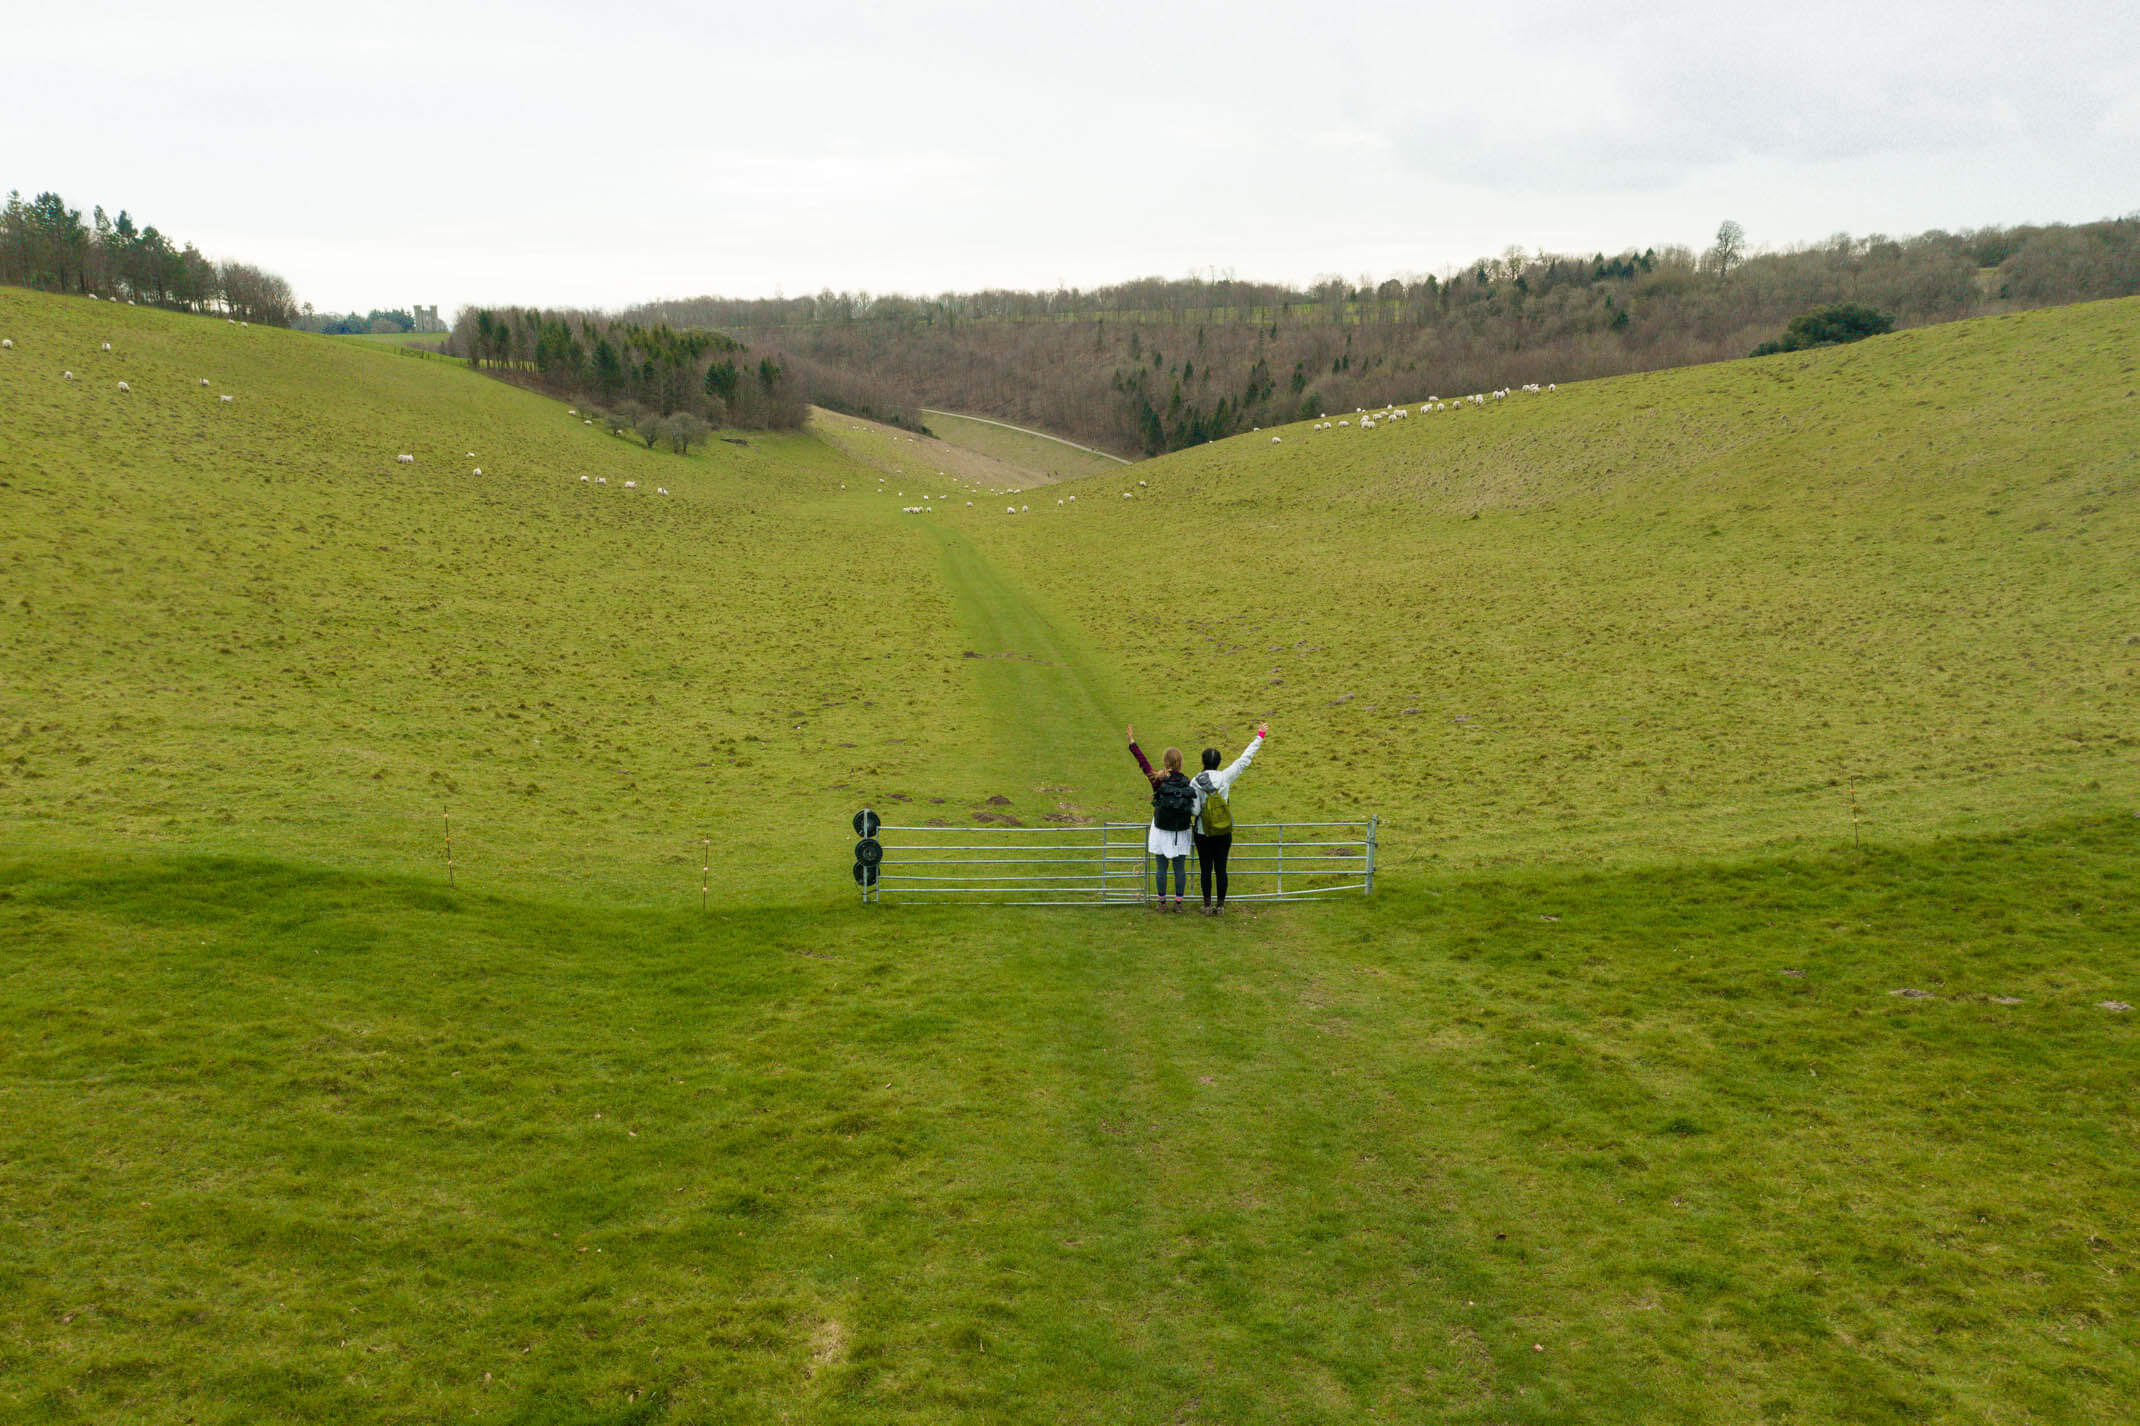 Fun ideas for a 3-day microgap in the South Downs, West Sussex